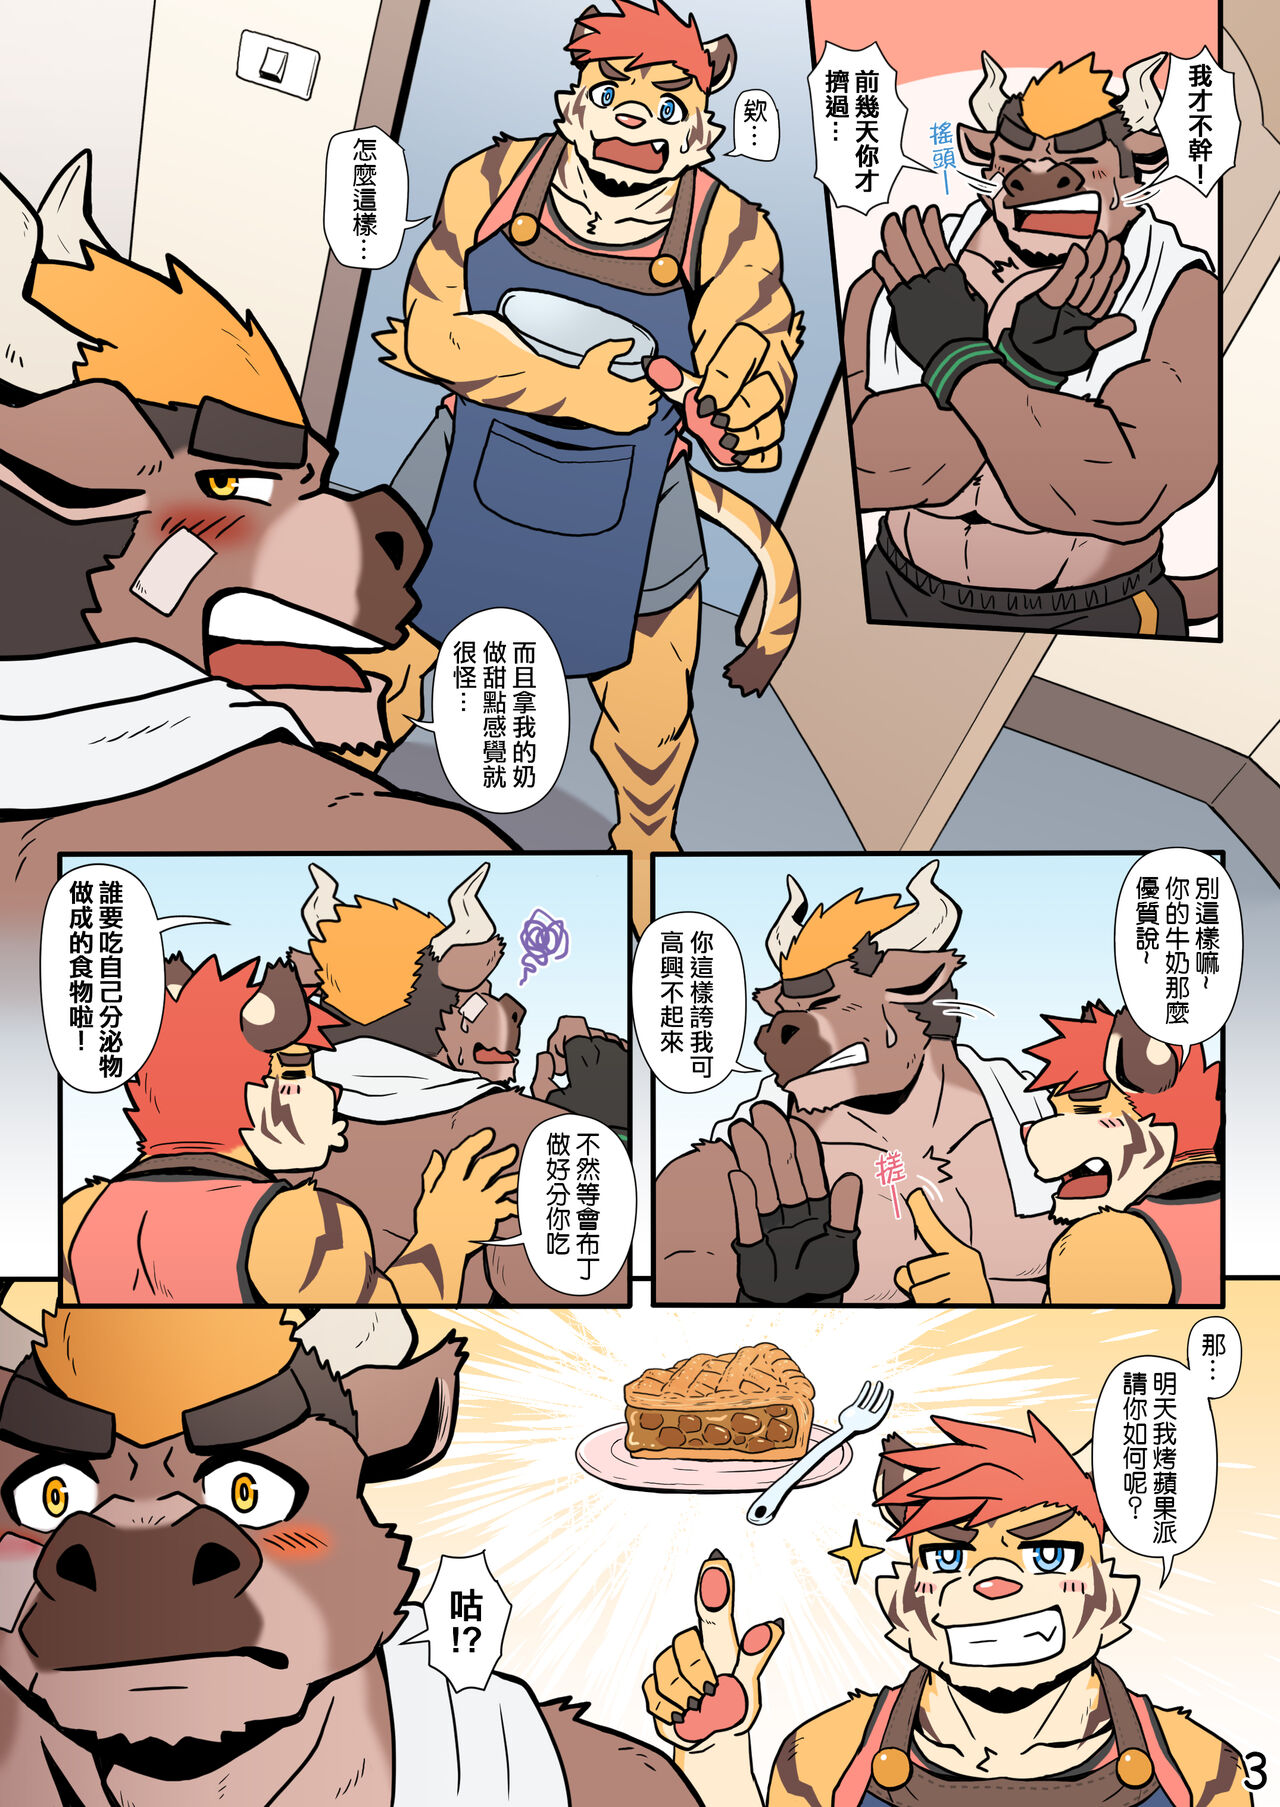 [Ripple Moon] My Milky Roomie: Homemade Pudding (Ongoing) [Chinese] (Flat Color) [漣漪月影] 牛奶好朋友: 手工布丁 (连载中) (单色版)